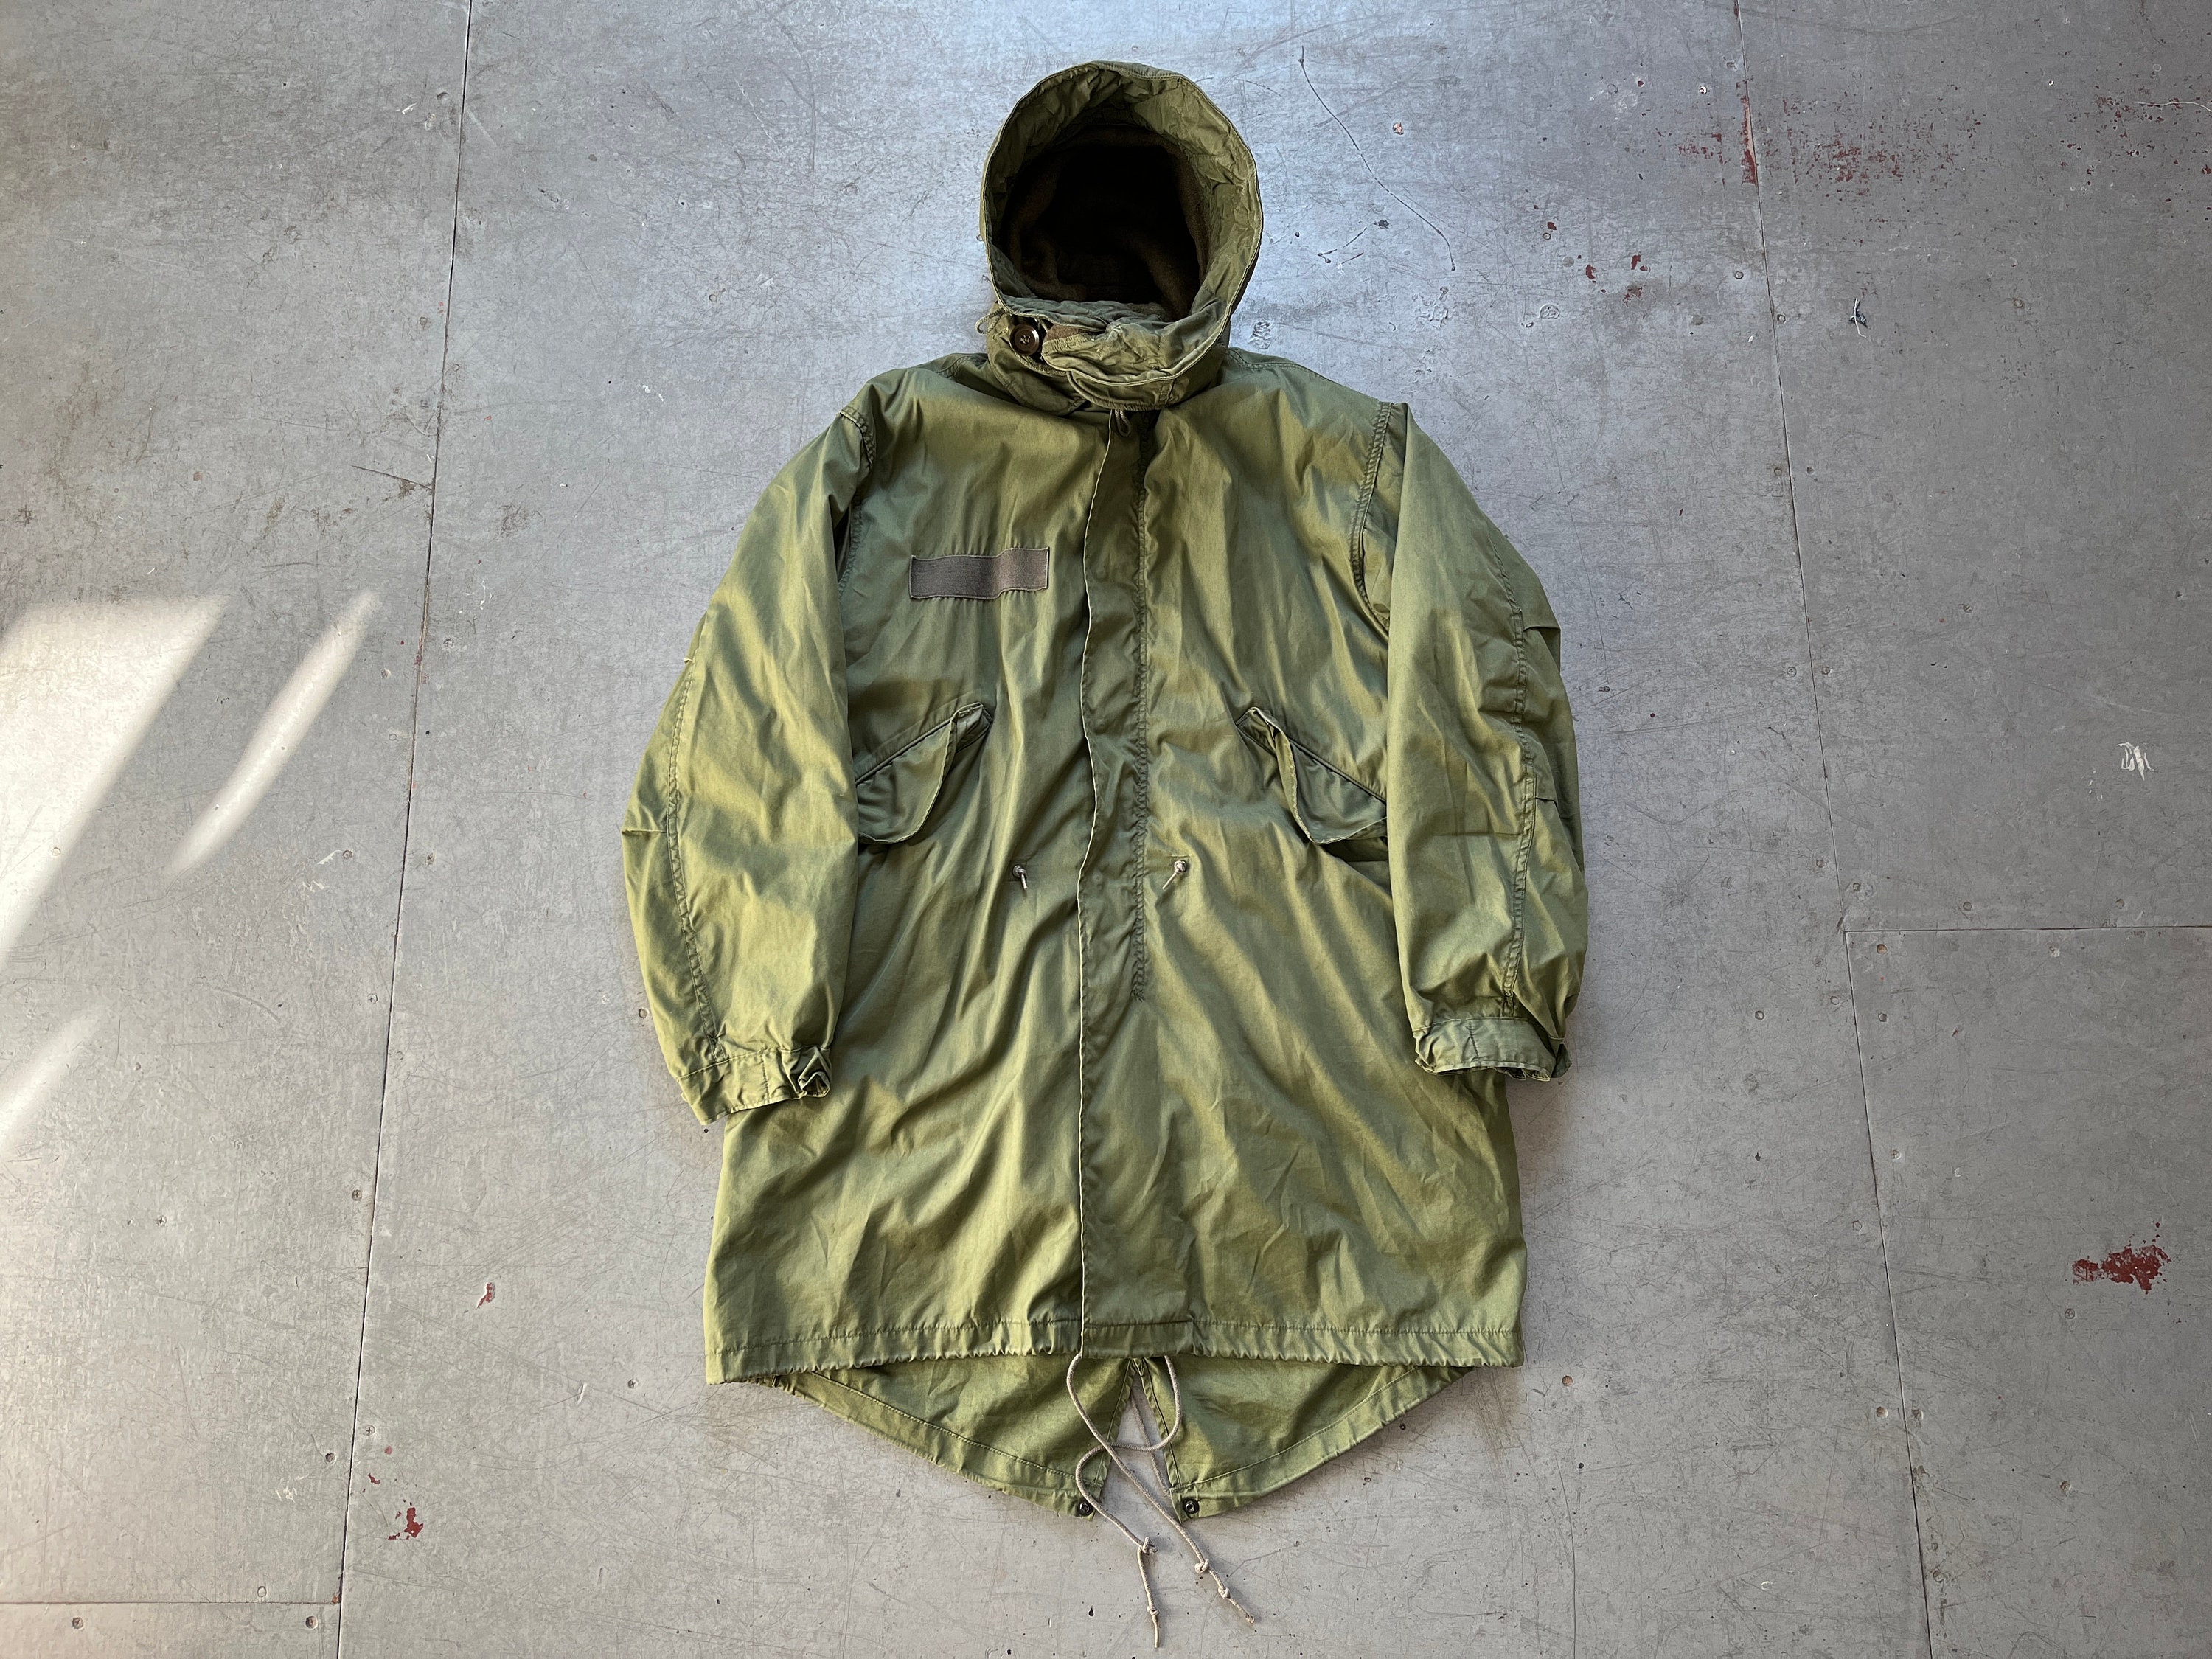 80s Vintage US Army Military Olive Green M65 M-65 Fishtail Parka